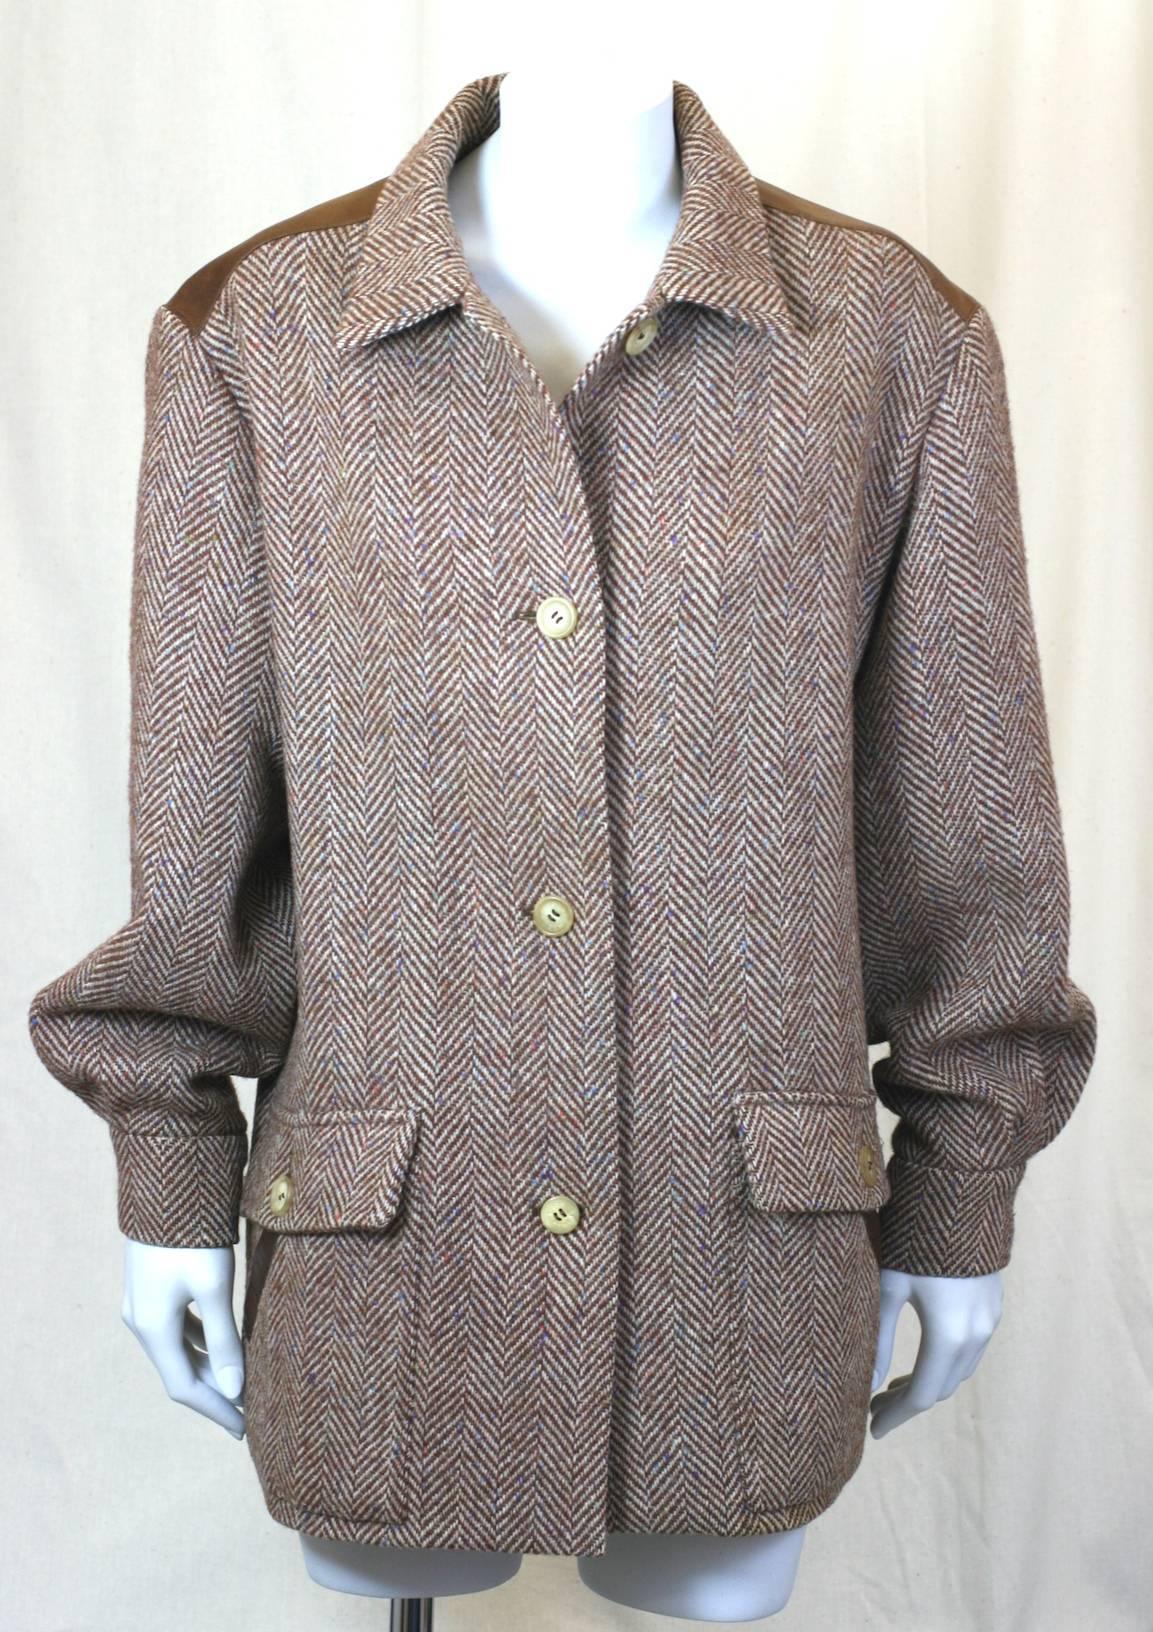 Hermes Tweed and Leather Trimmed Jacket. Brown wool herringbone Harris tweed with amazing muliti colored flecks. Hermes logo horn buttons with wide self tweed belt. Leather yoke and slash pocket trim. Excellent condition. Size 42 Eu. 